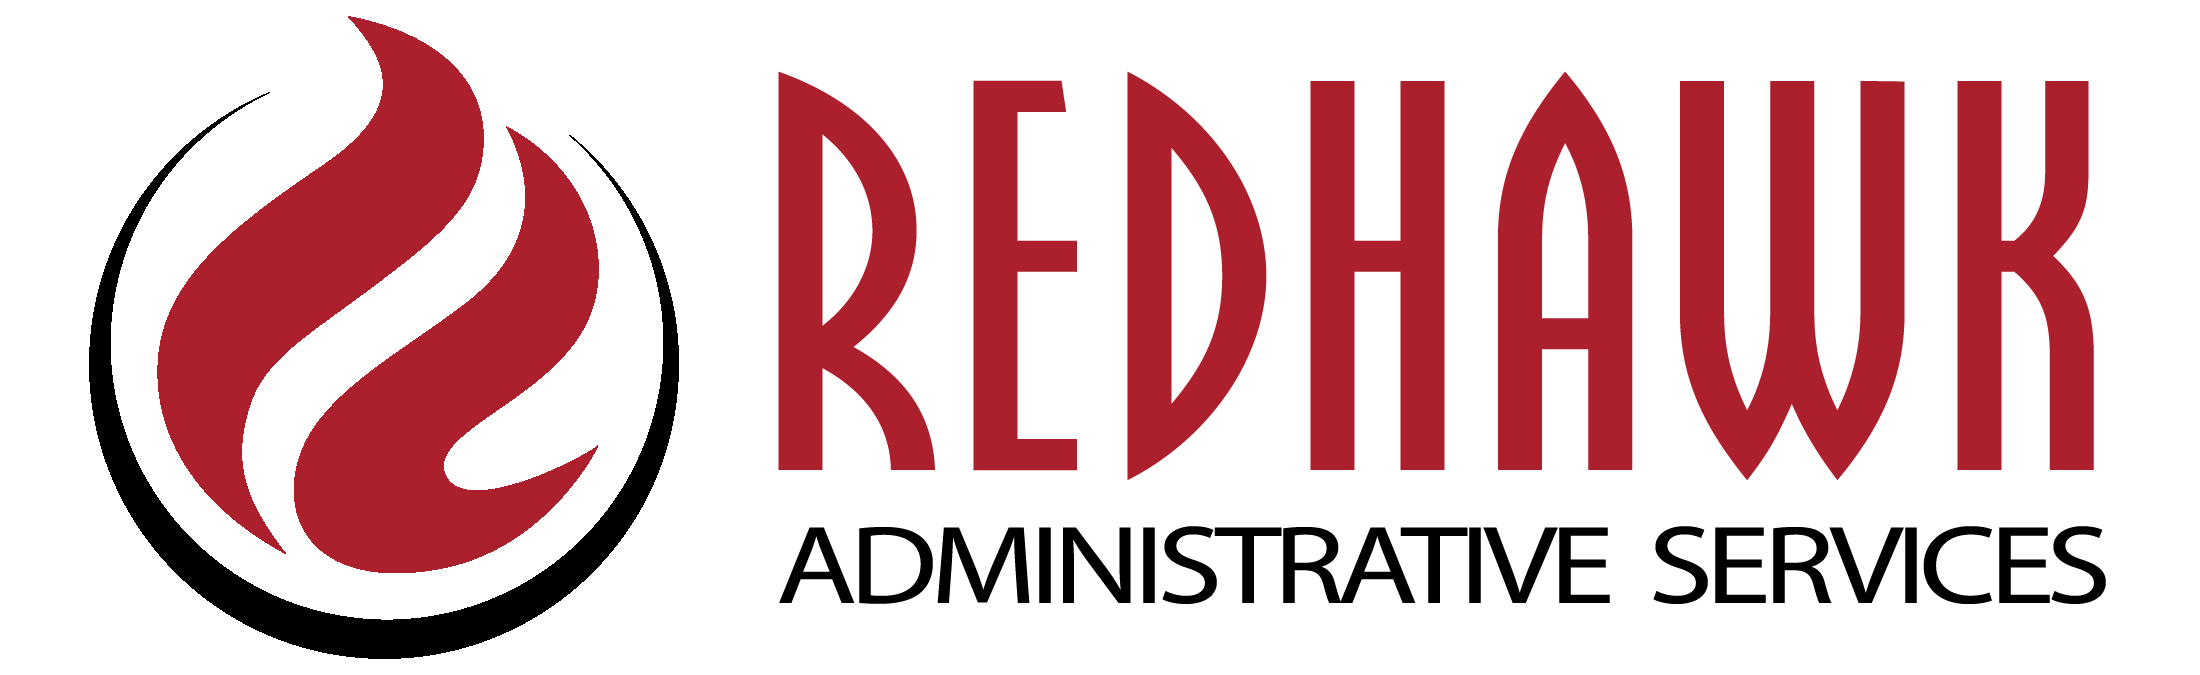 Redhawk Administrative Services